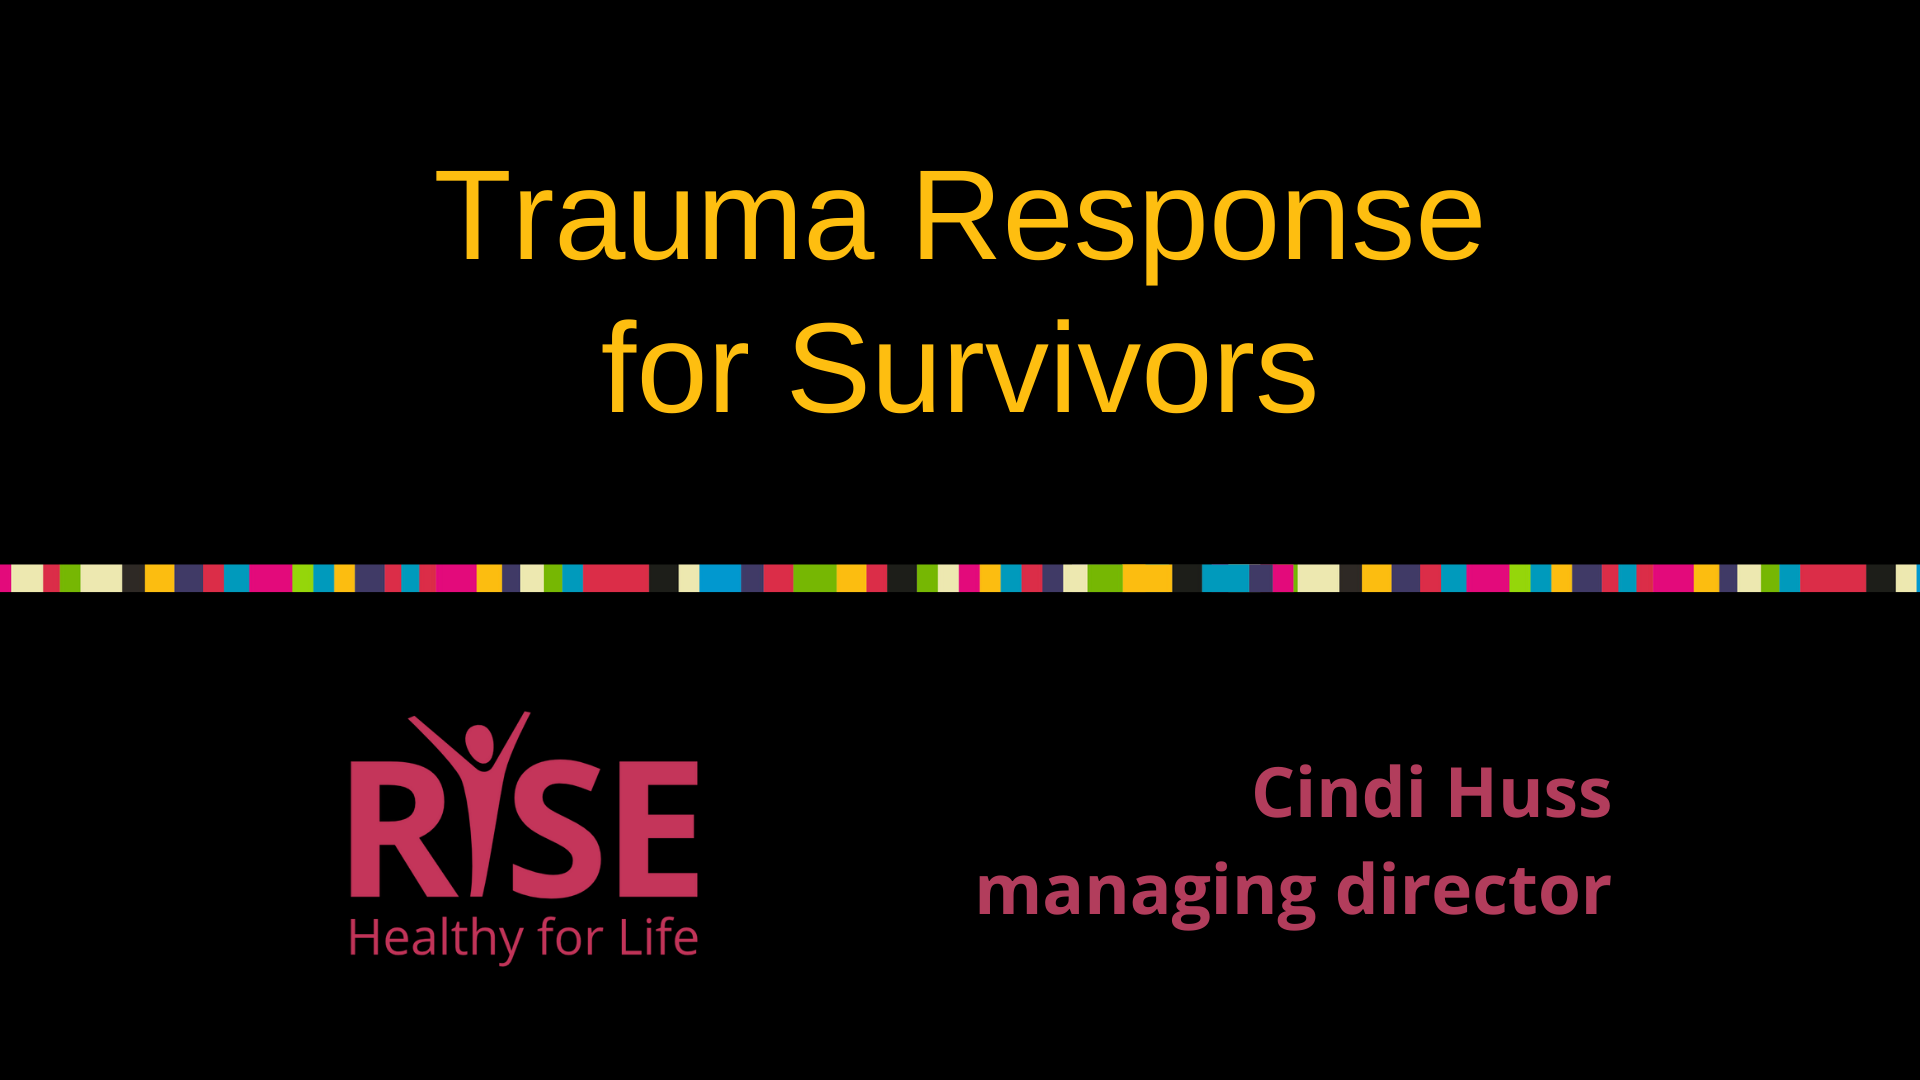 Why is it important for survivors to understand their own trauma responses?